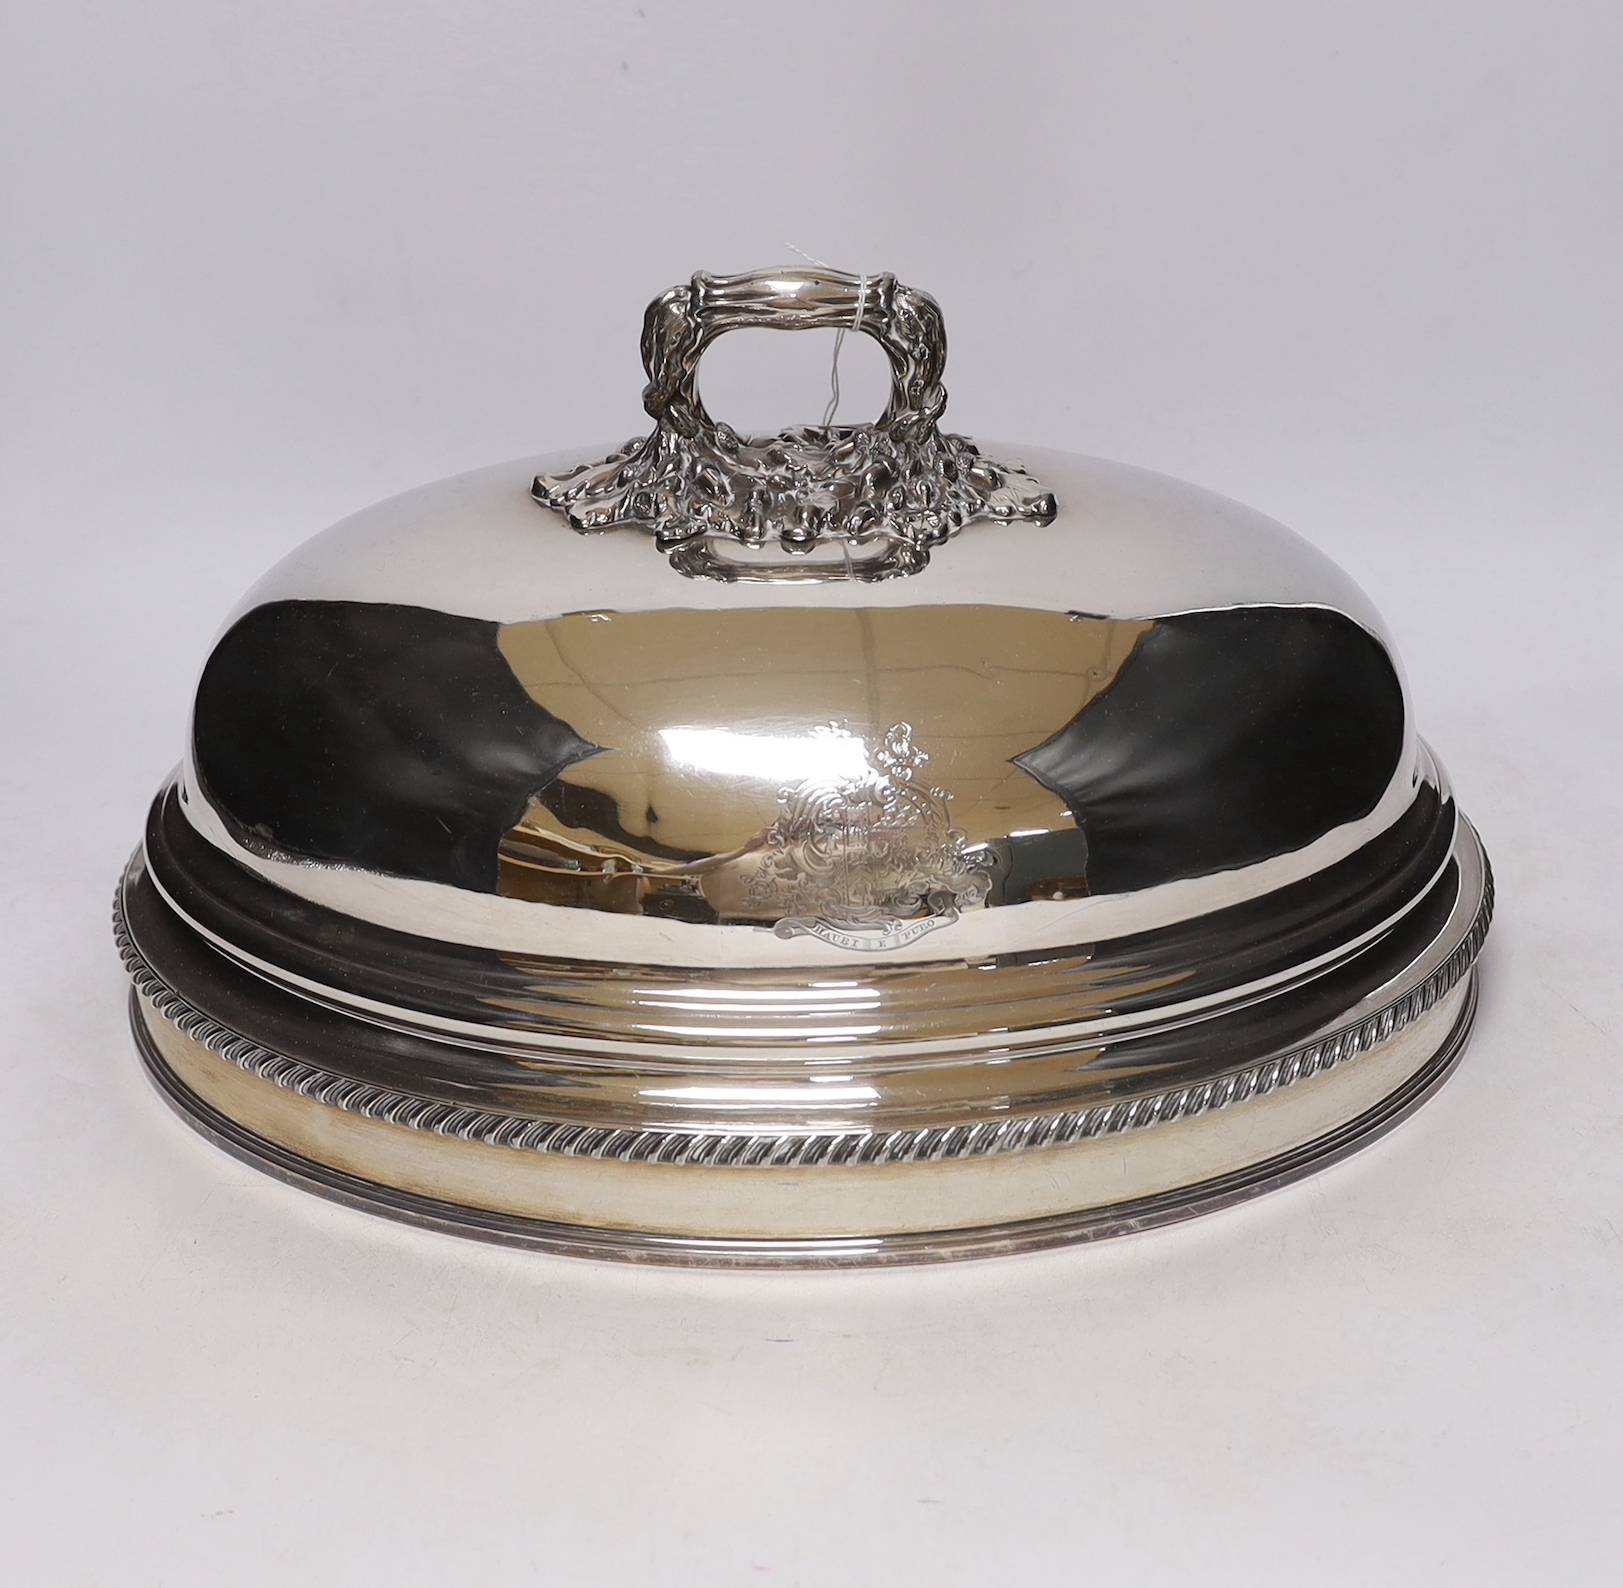 An Old Sheffield plate domed meat dish cover, 39.6cm